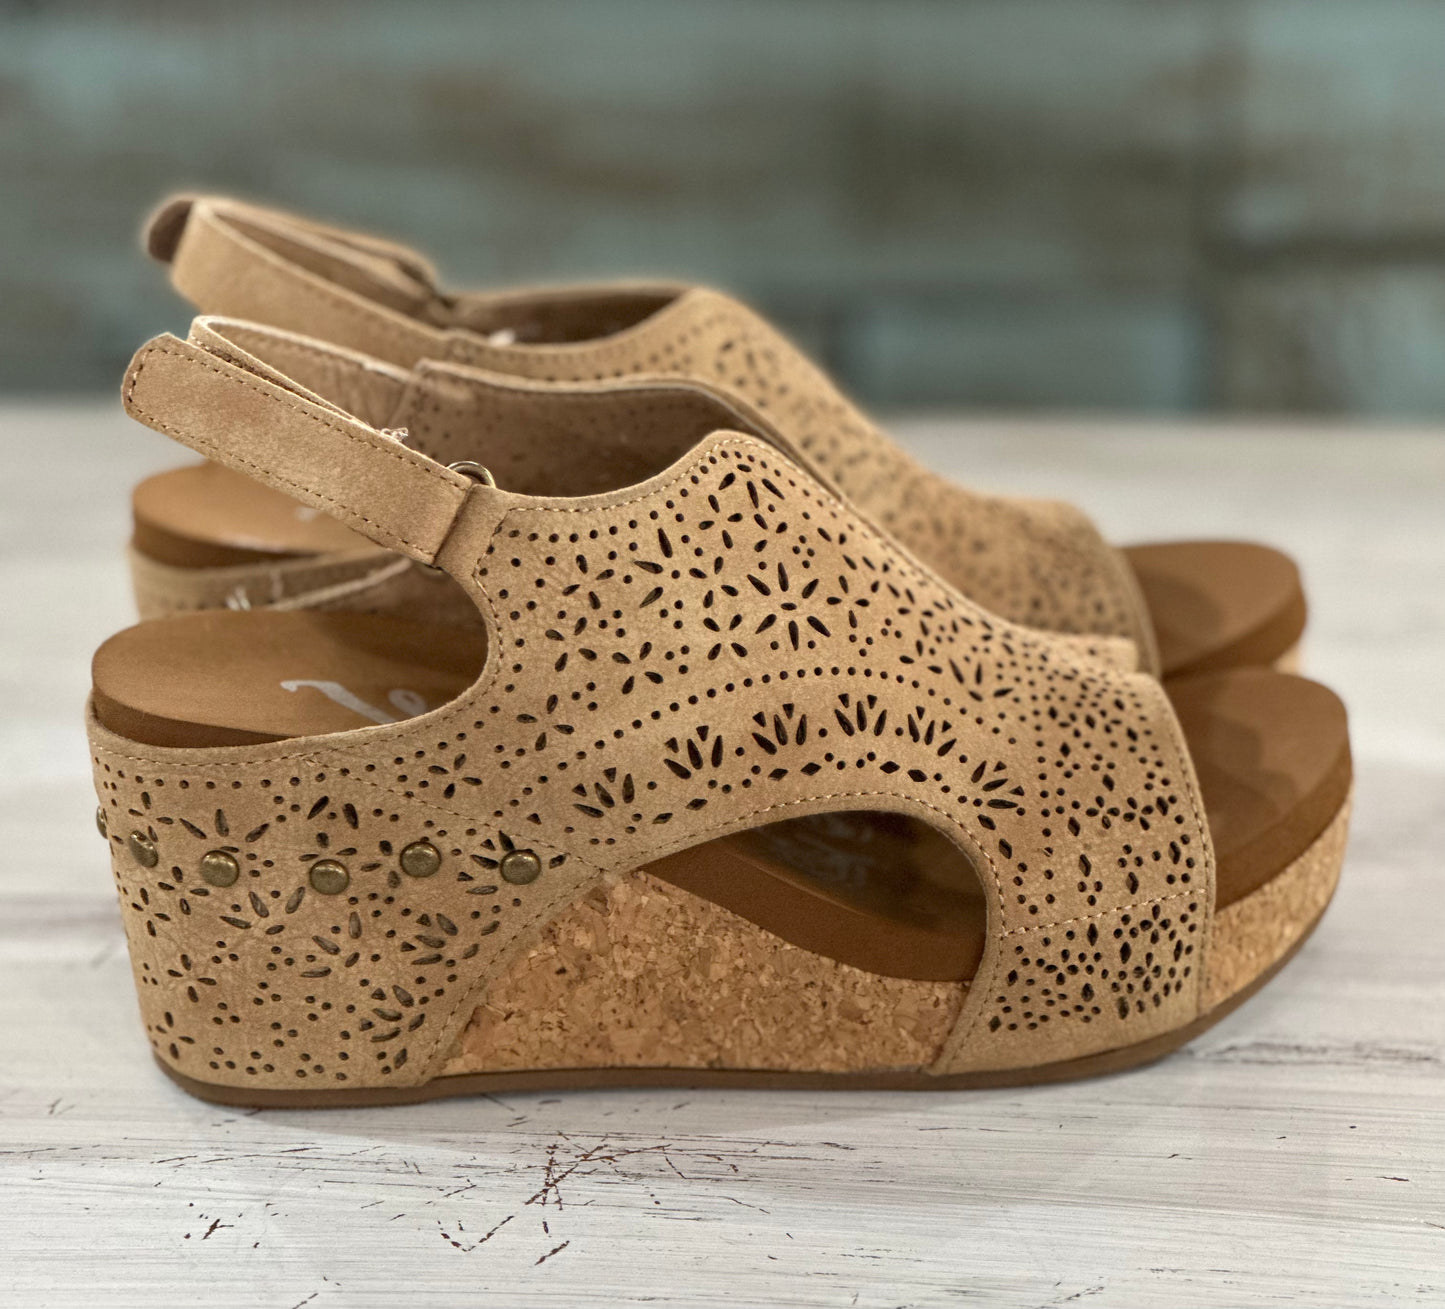 Very G Nude “Free Fly” wedges